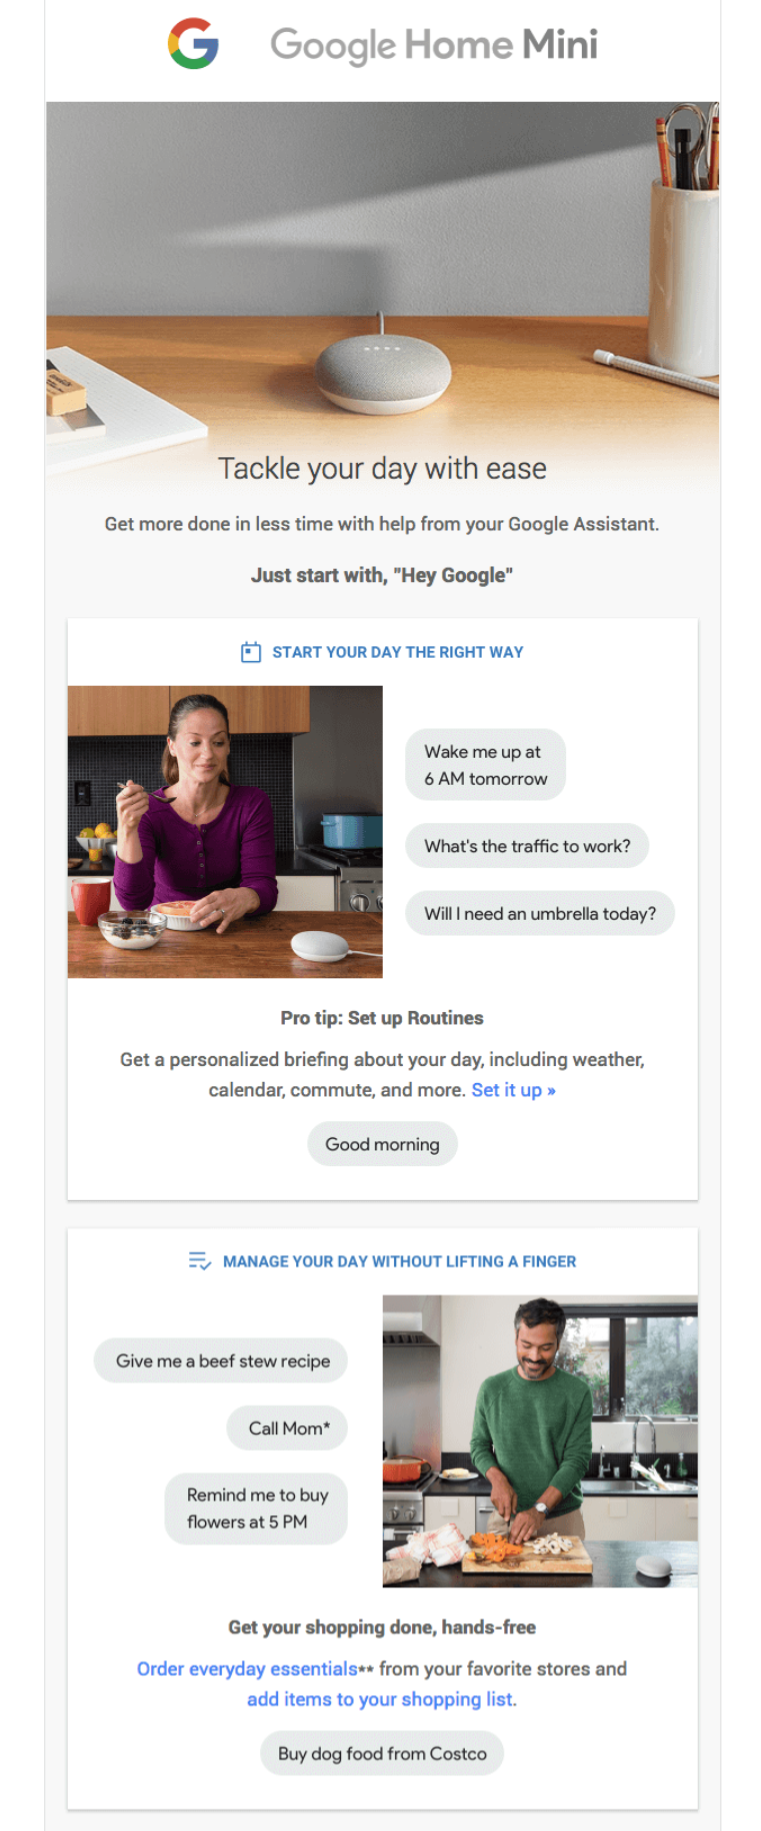 woocommerce post purchase email example from Google Home Mini